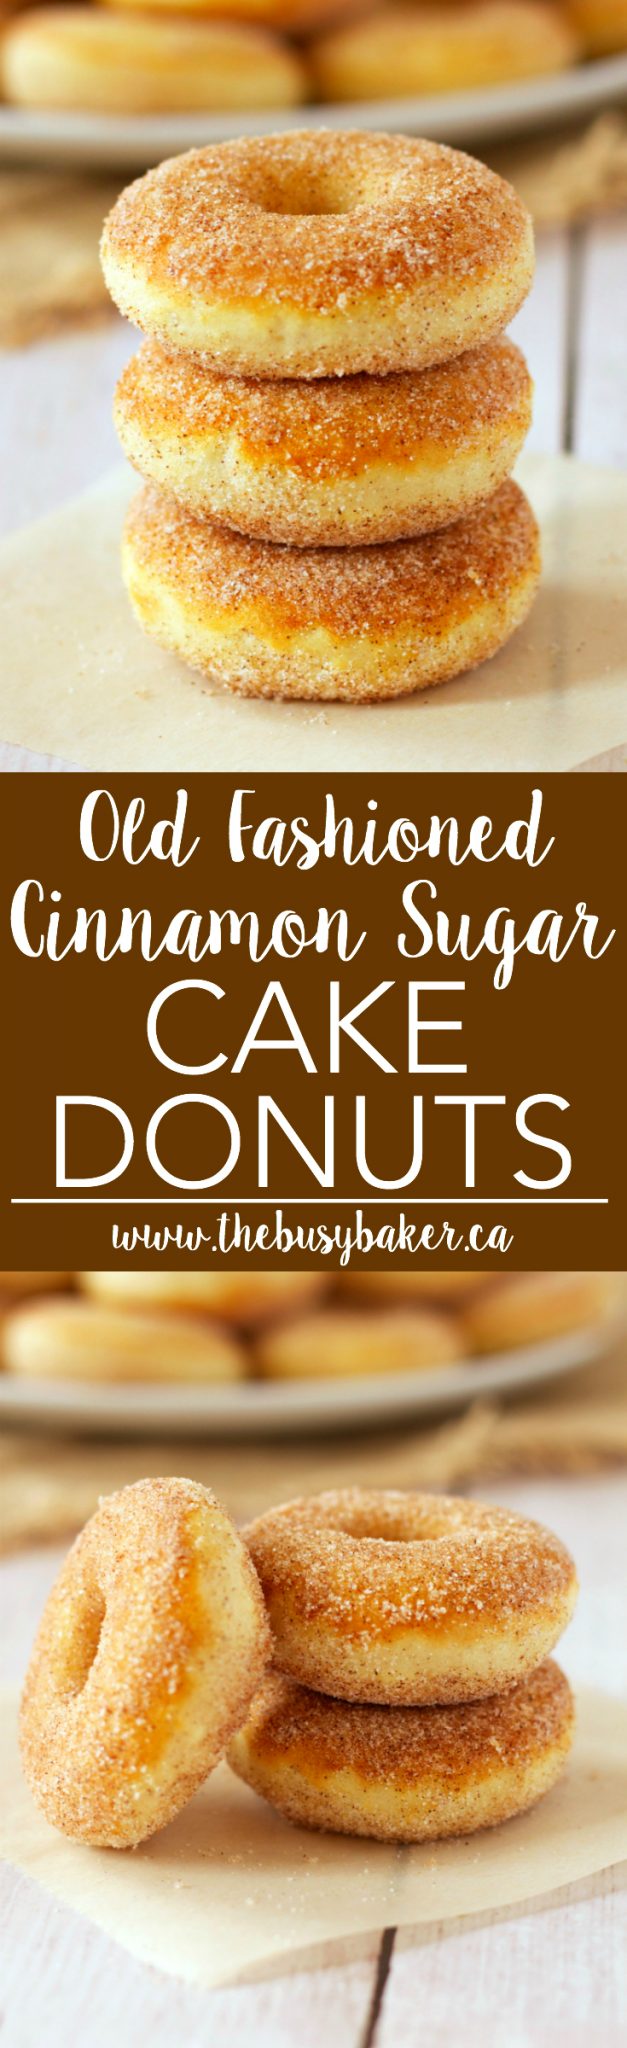 These Old Fashioned Cinnamon Sugar Baked Cake Donuts are easy to make, and they're lower in fat and sugar than most donuts, making them a healthier choice! Recipe from thebusybaker.ca! via @busybakerblog